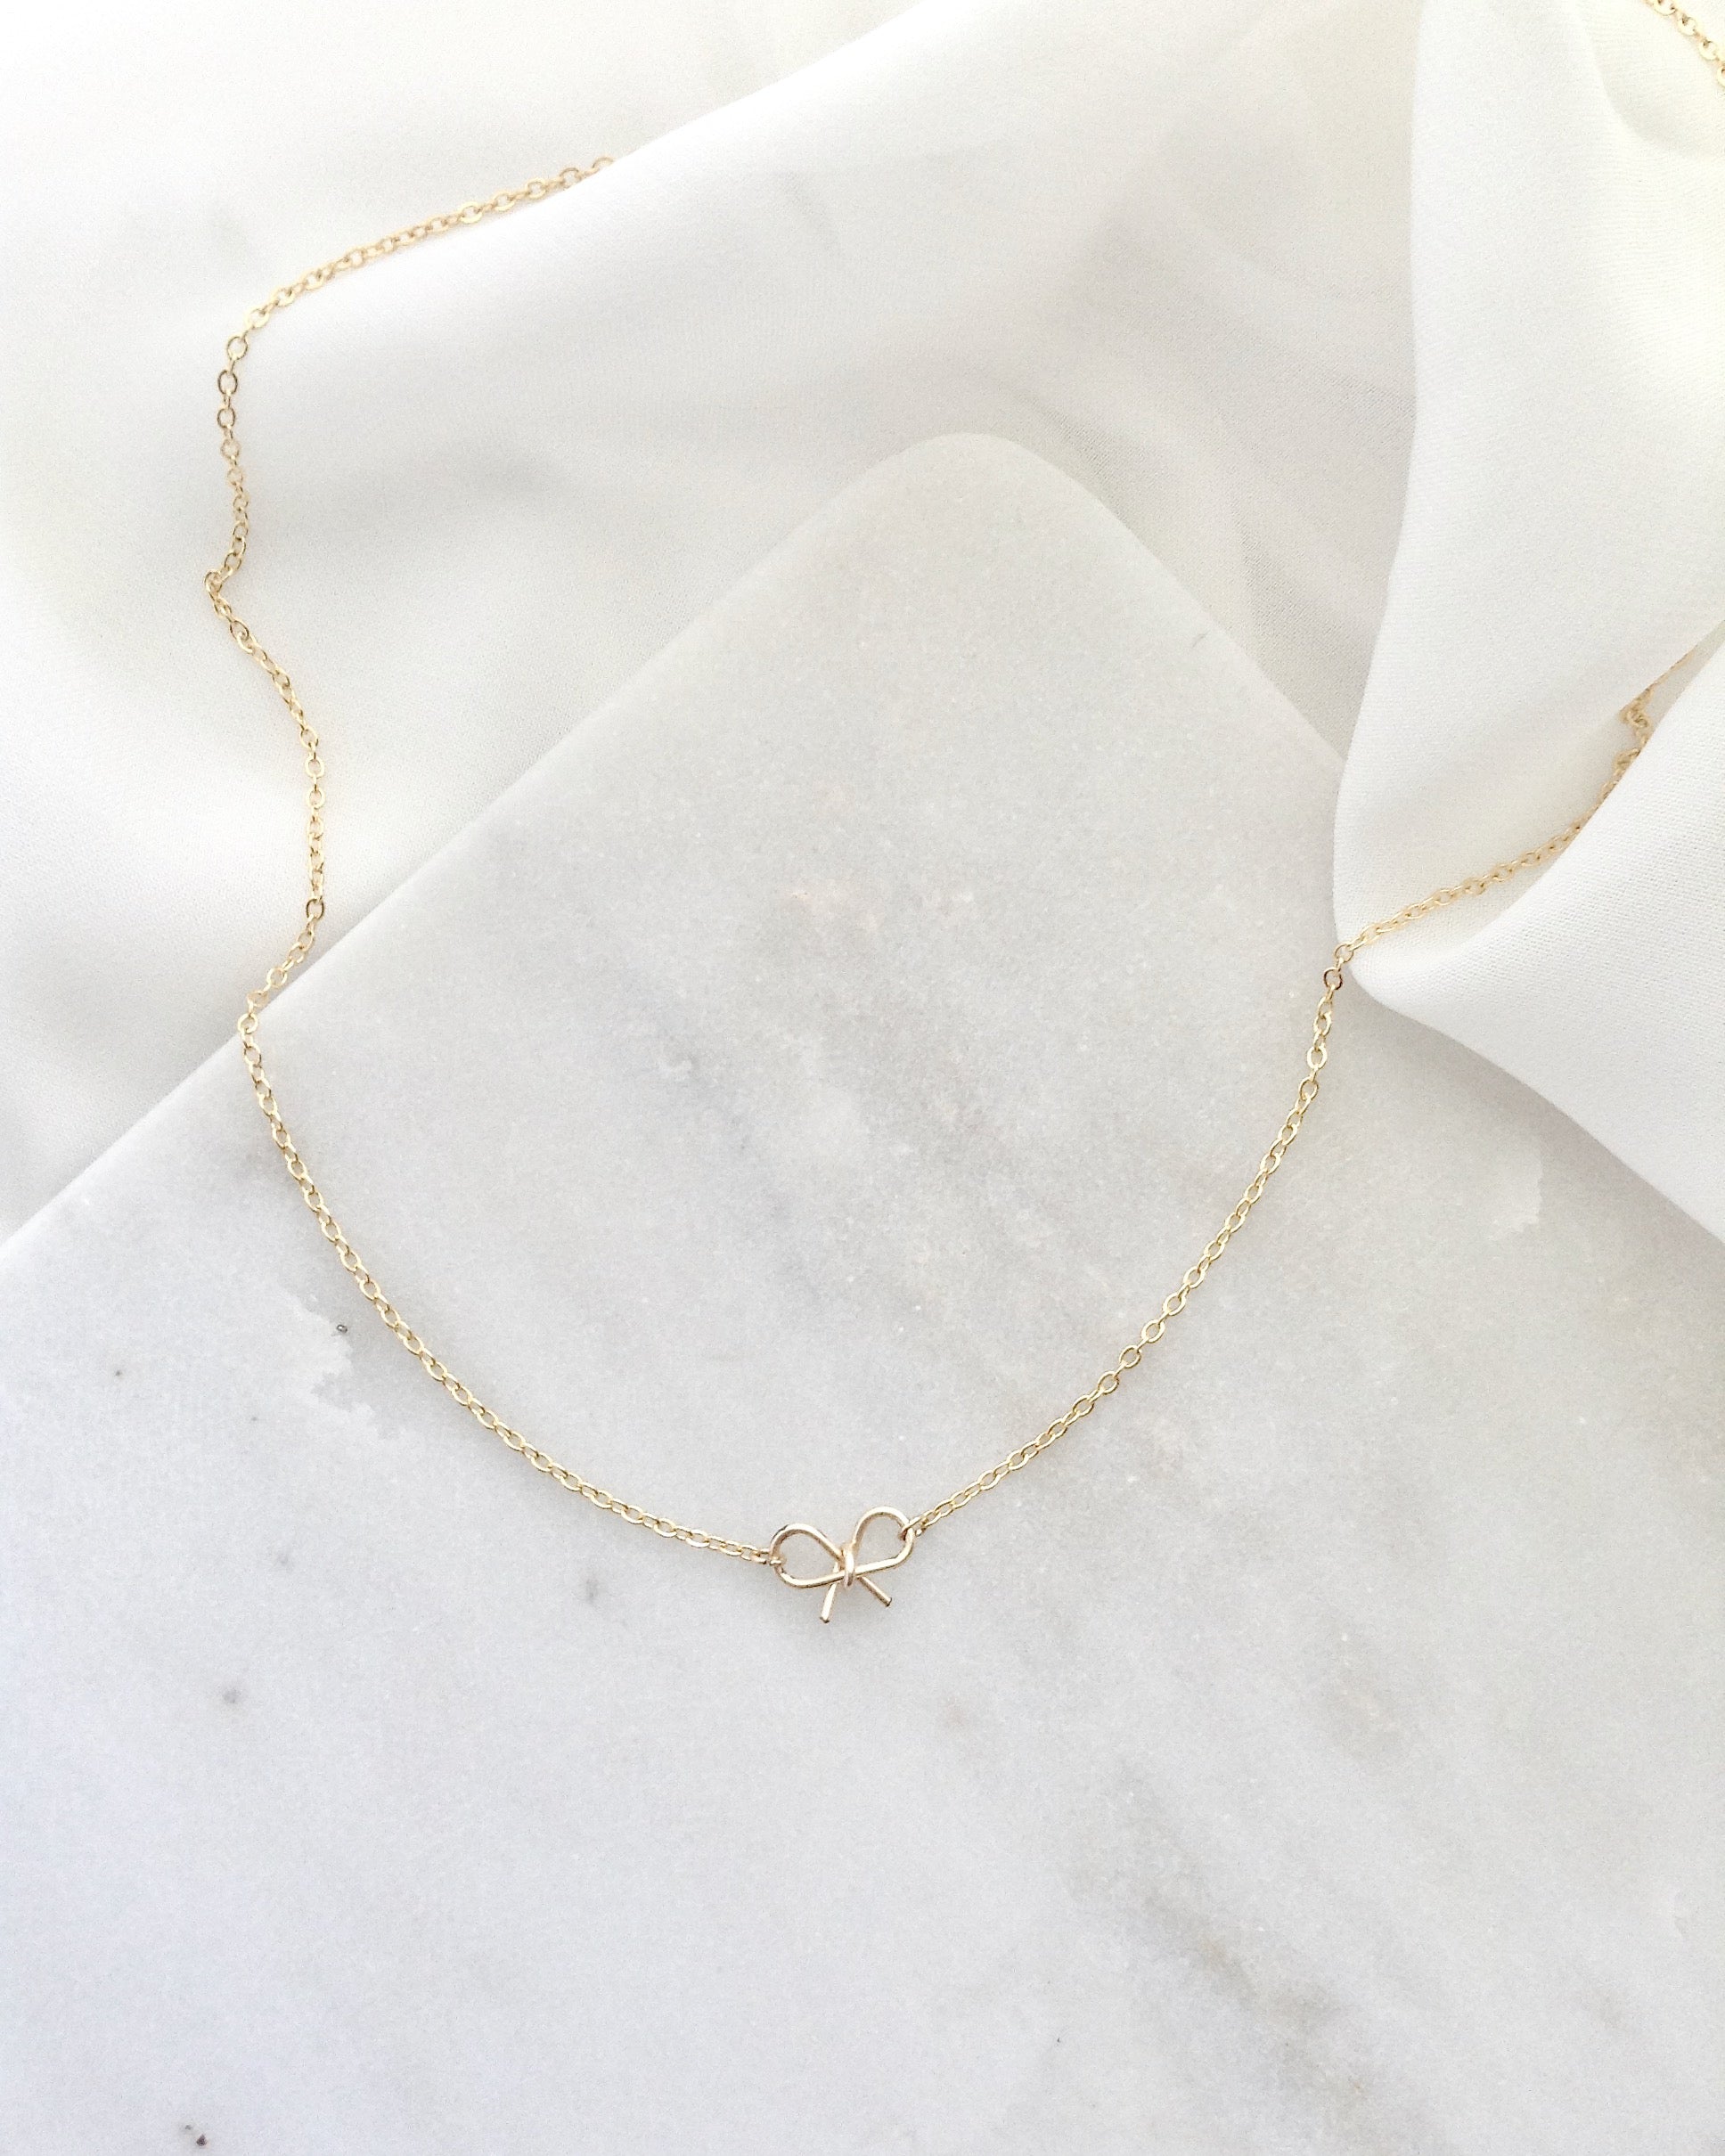 Bow Choker Necklace | Dainty Choker in Gold Filled or Sterling Silver | Delicate Choker | IB Jewelry